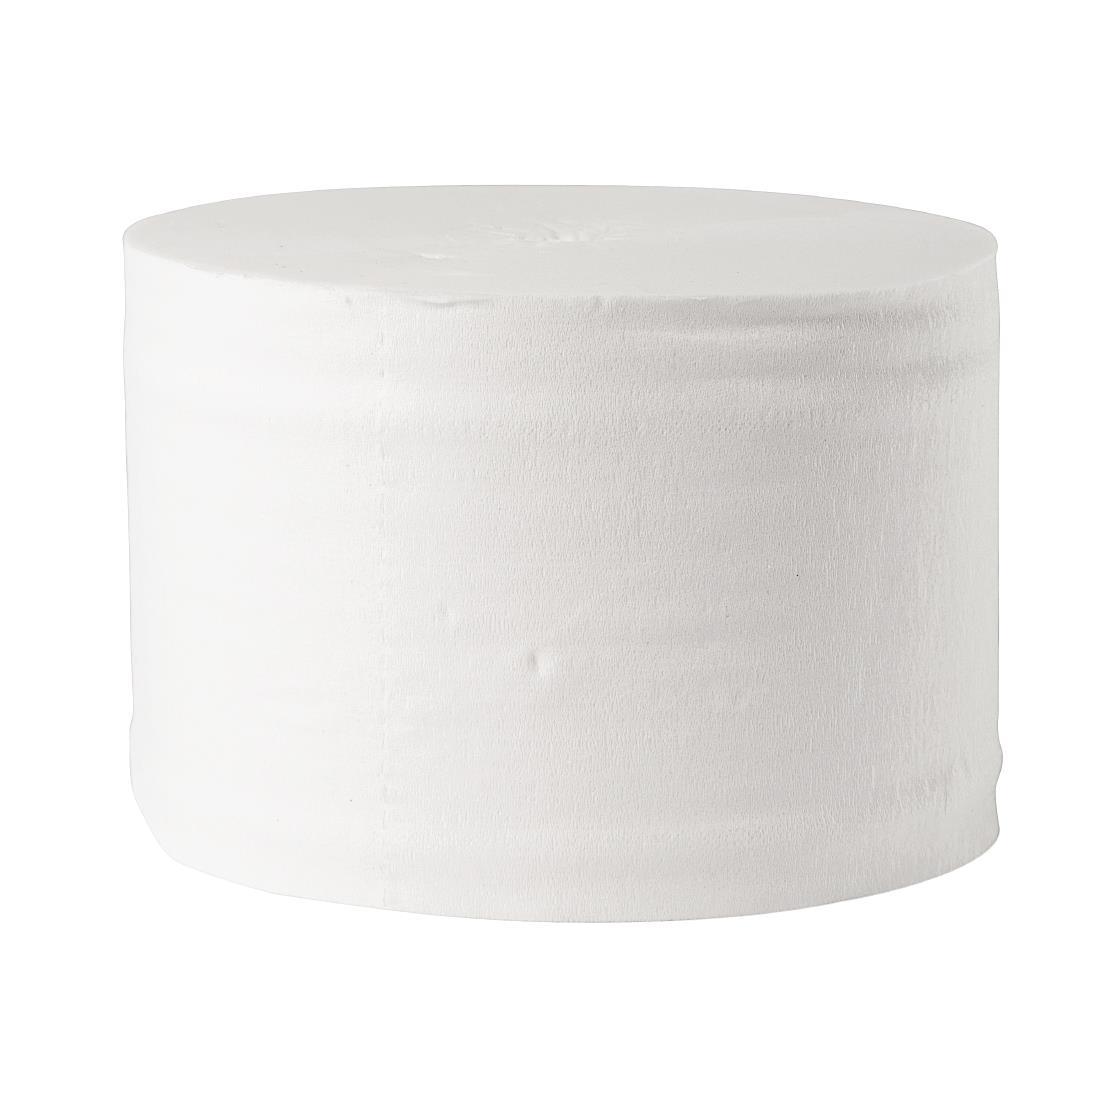 Jantex Compact Coreless Toilet Paper 2-Ply 96m (Pack of 36) - GL061  - 1